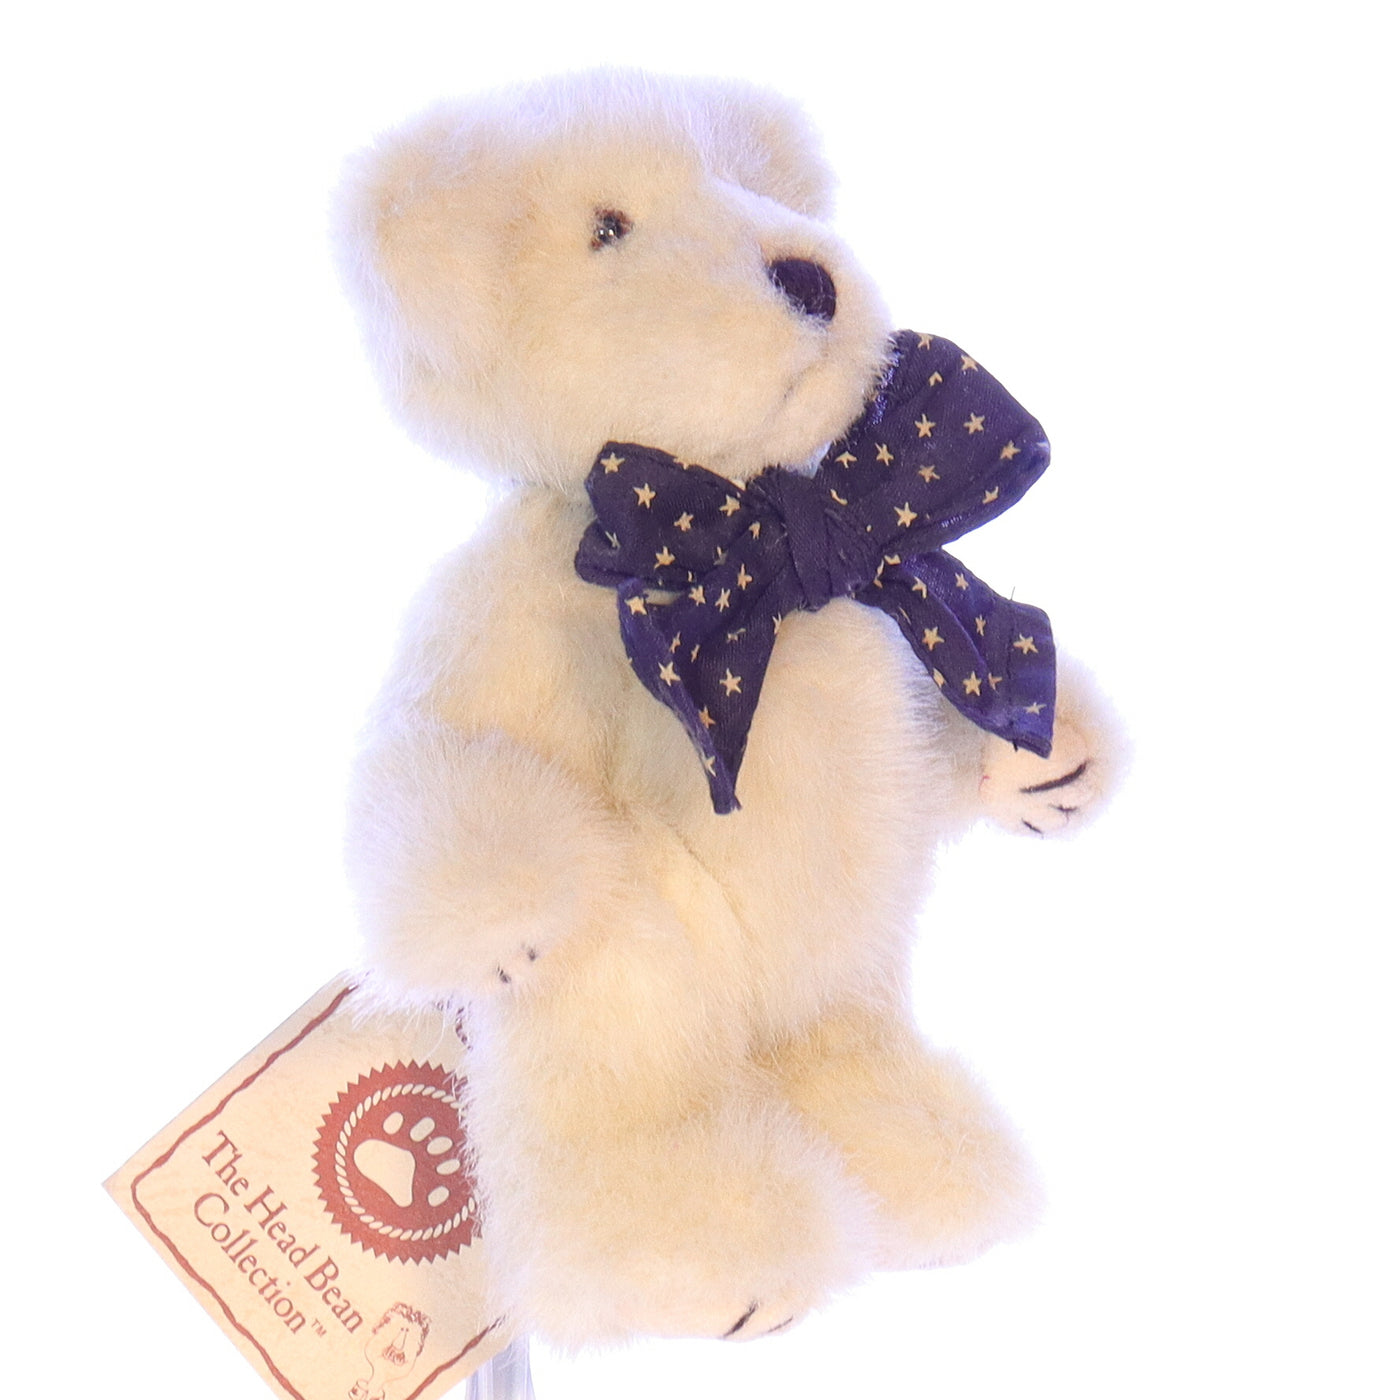 Boyds Bears Collection Plush with Tags H.B.'s Heirloom Series 99950V Polaris 6"